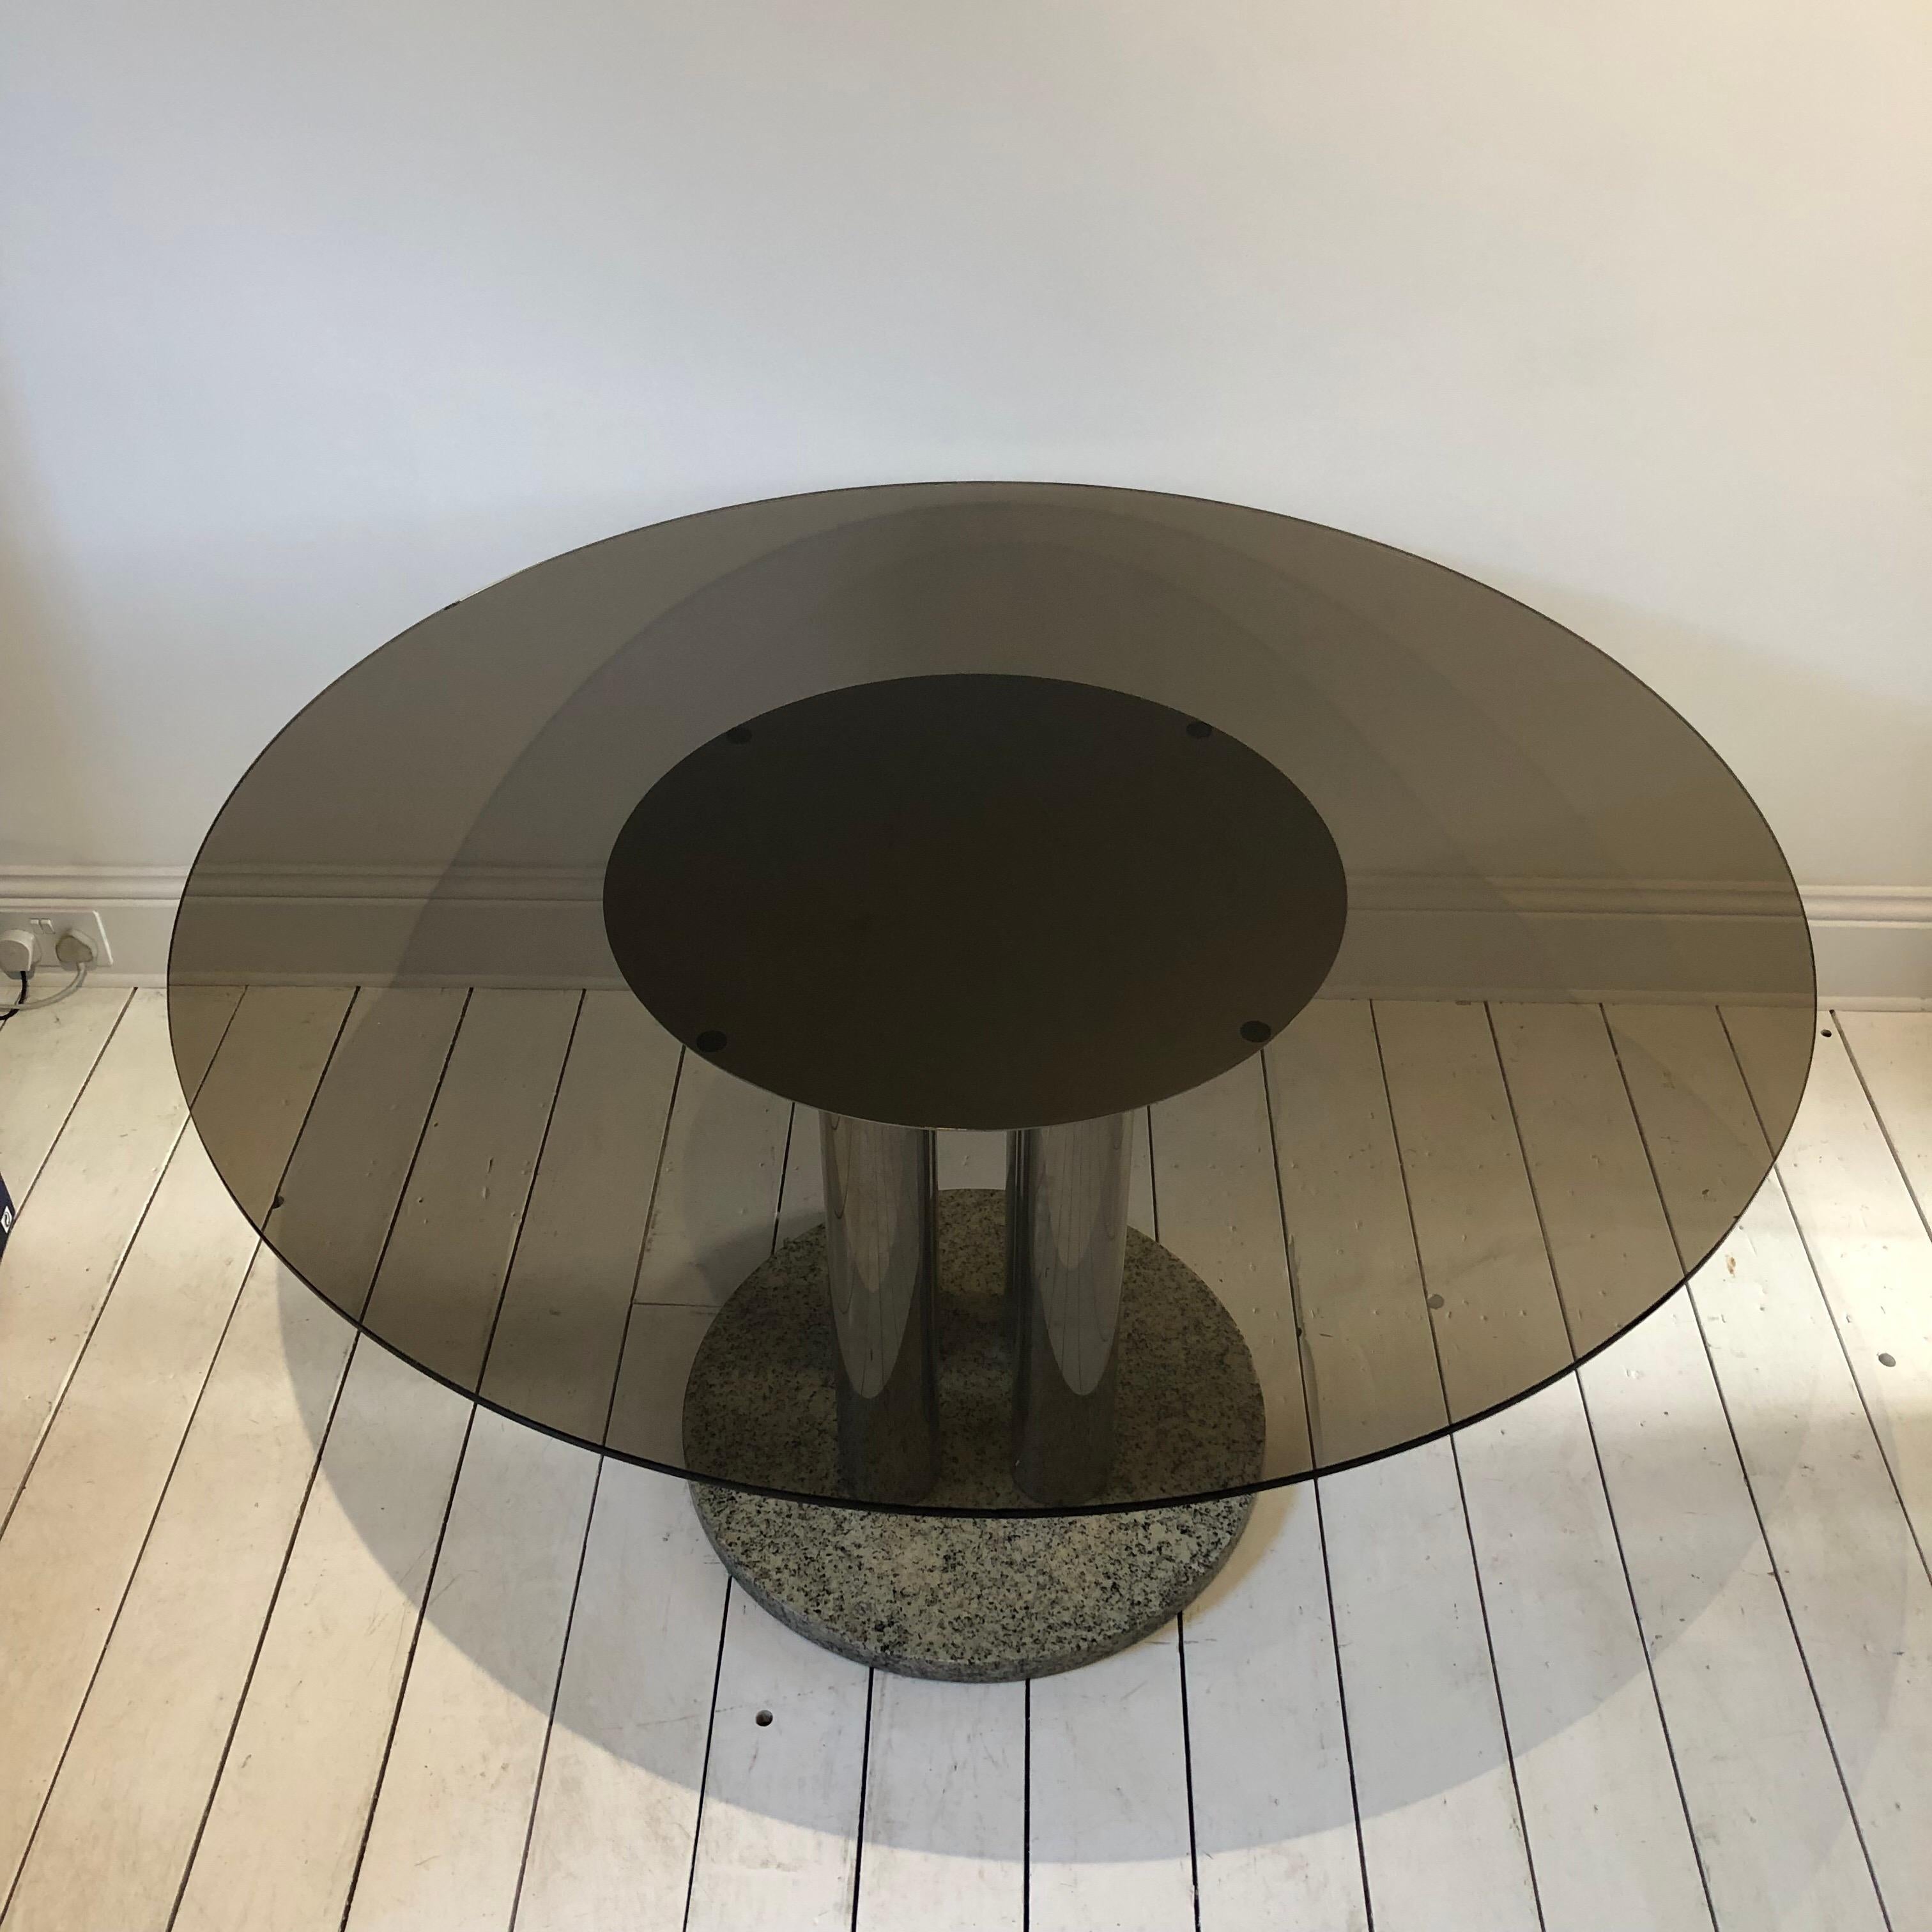 Post-Modern Midcentury Zanuso Zanotta Attributed Round Dining Table Chrome Columns, 1970s For Sale